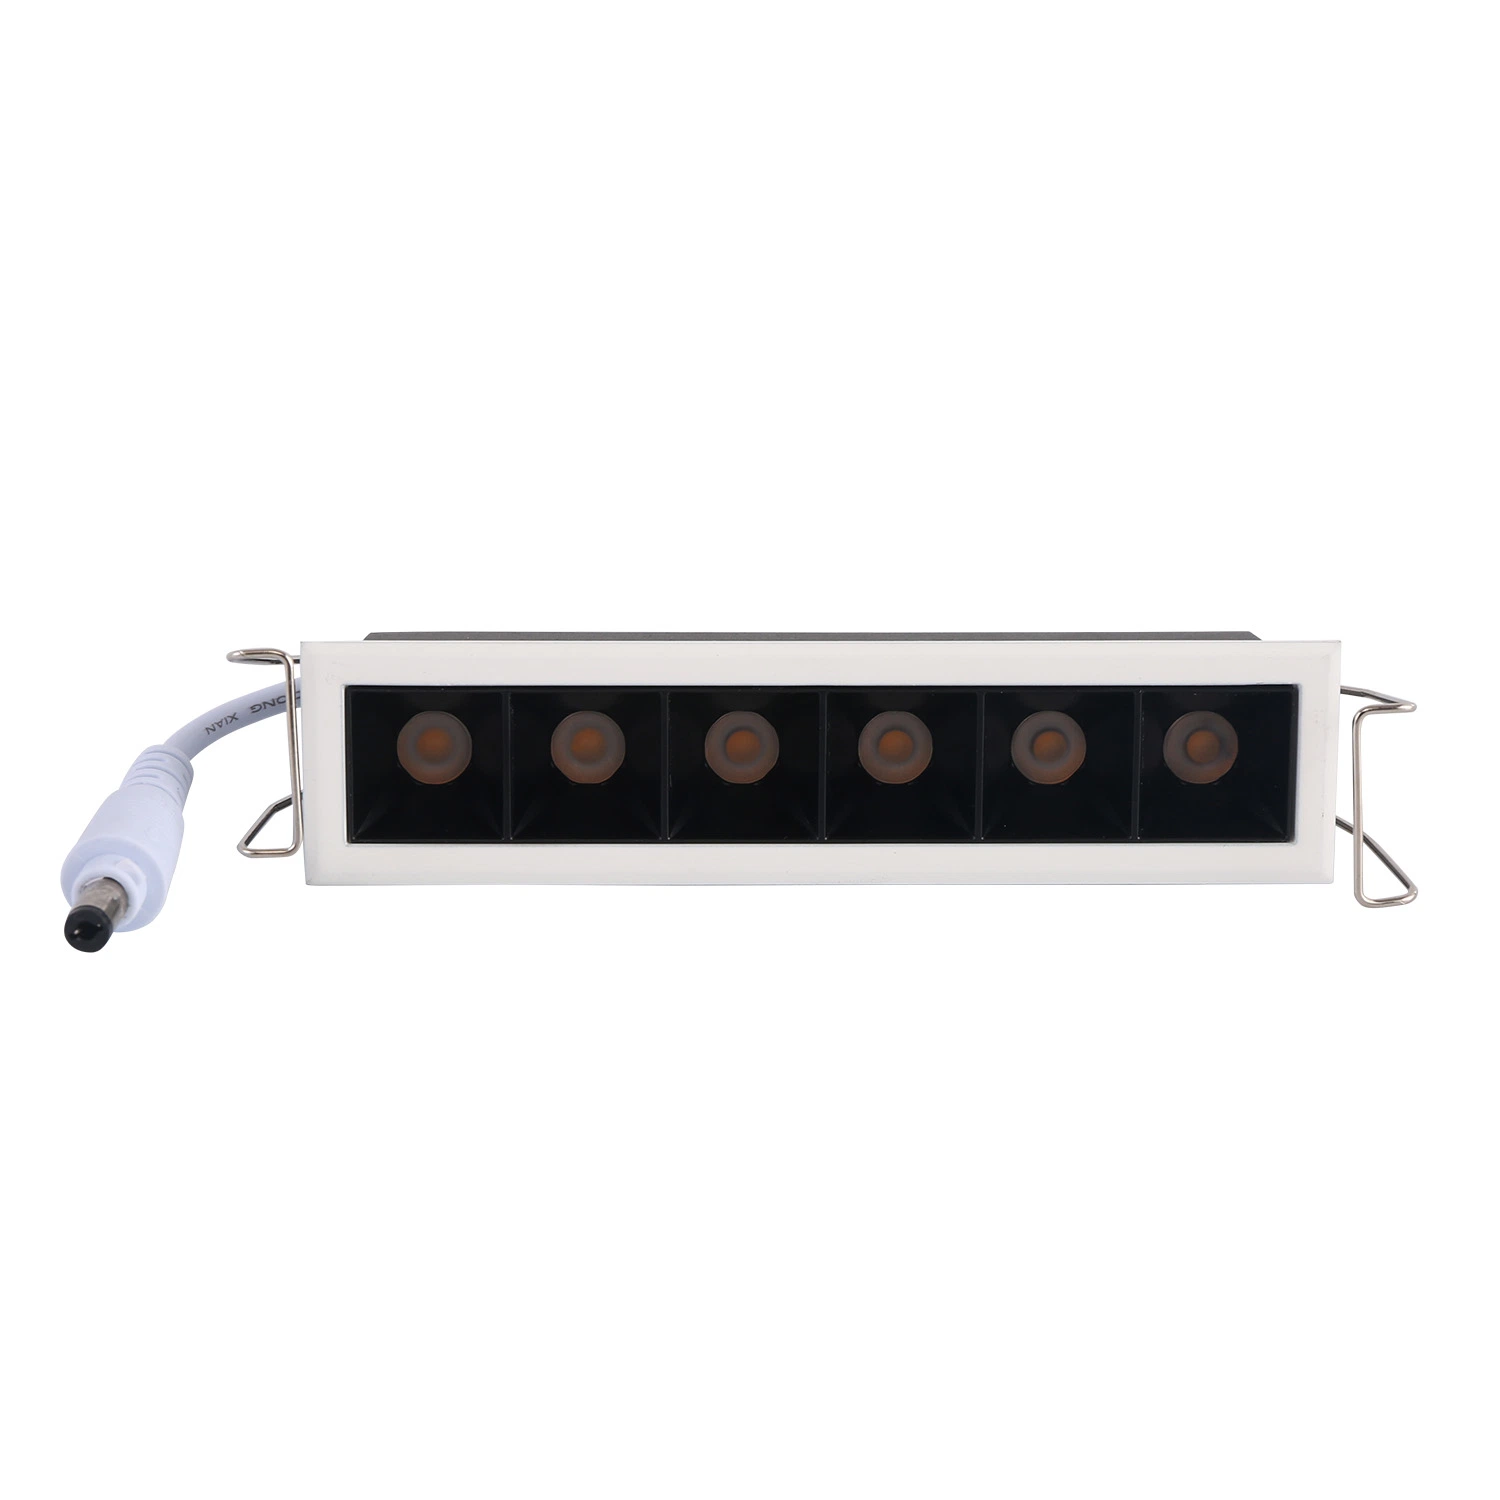 Anti Glare 2W~20W Ceiling Recessed LED Linear Grille Down Spot Light with 5 Year Warranty